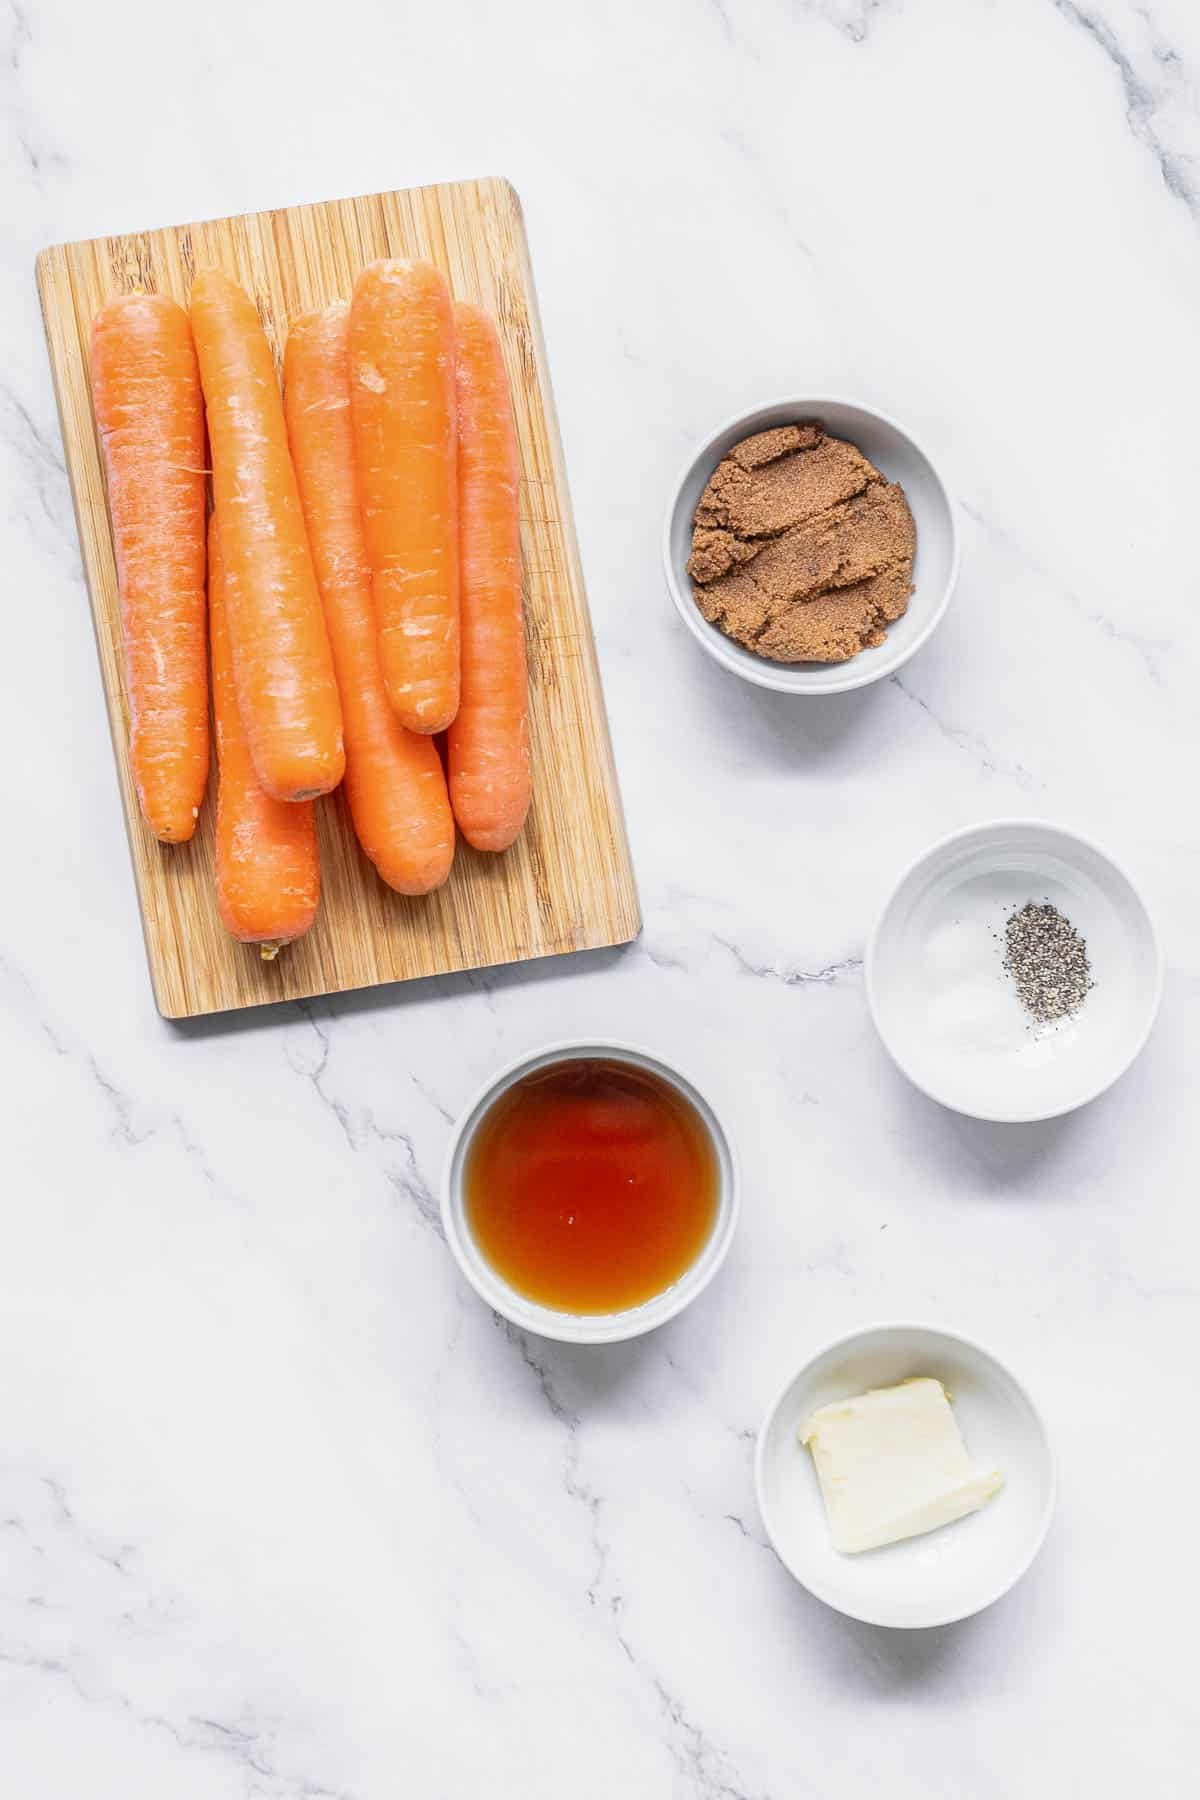 Ingredients for Maple glazed carrots - Carrots, butter, maple syrup, brown sugar, salt and black pepper.